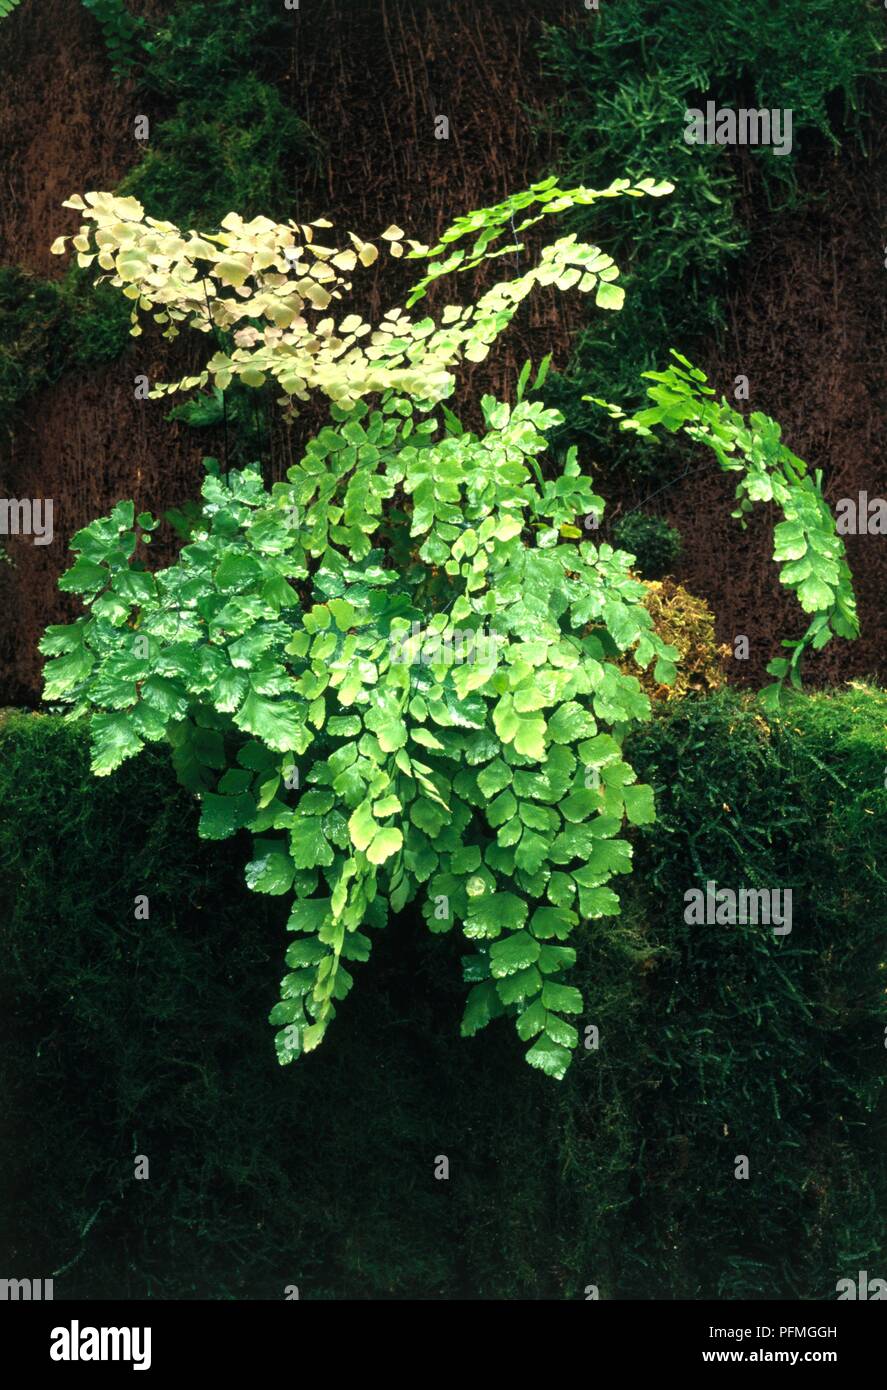 Adiantum tenerum, fern with pinnate leaves and bright green leaflets Stock Photo